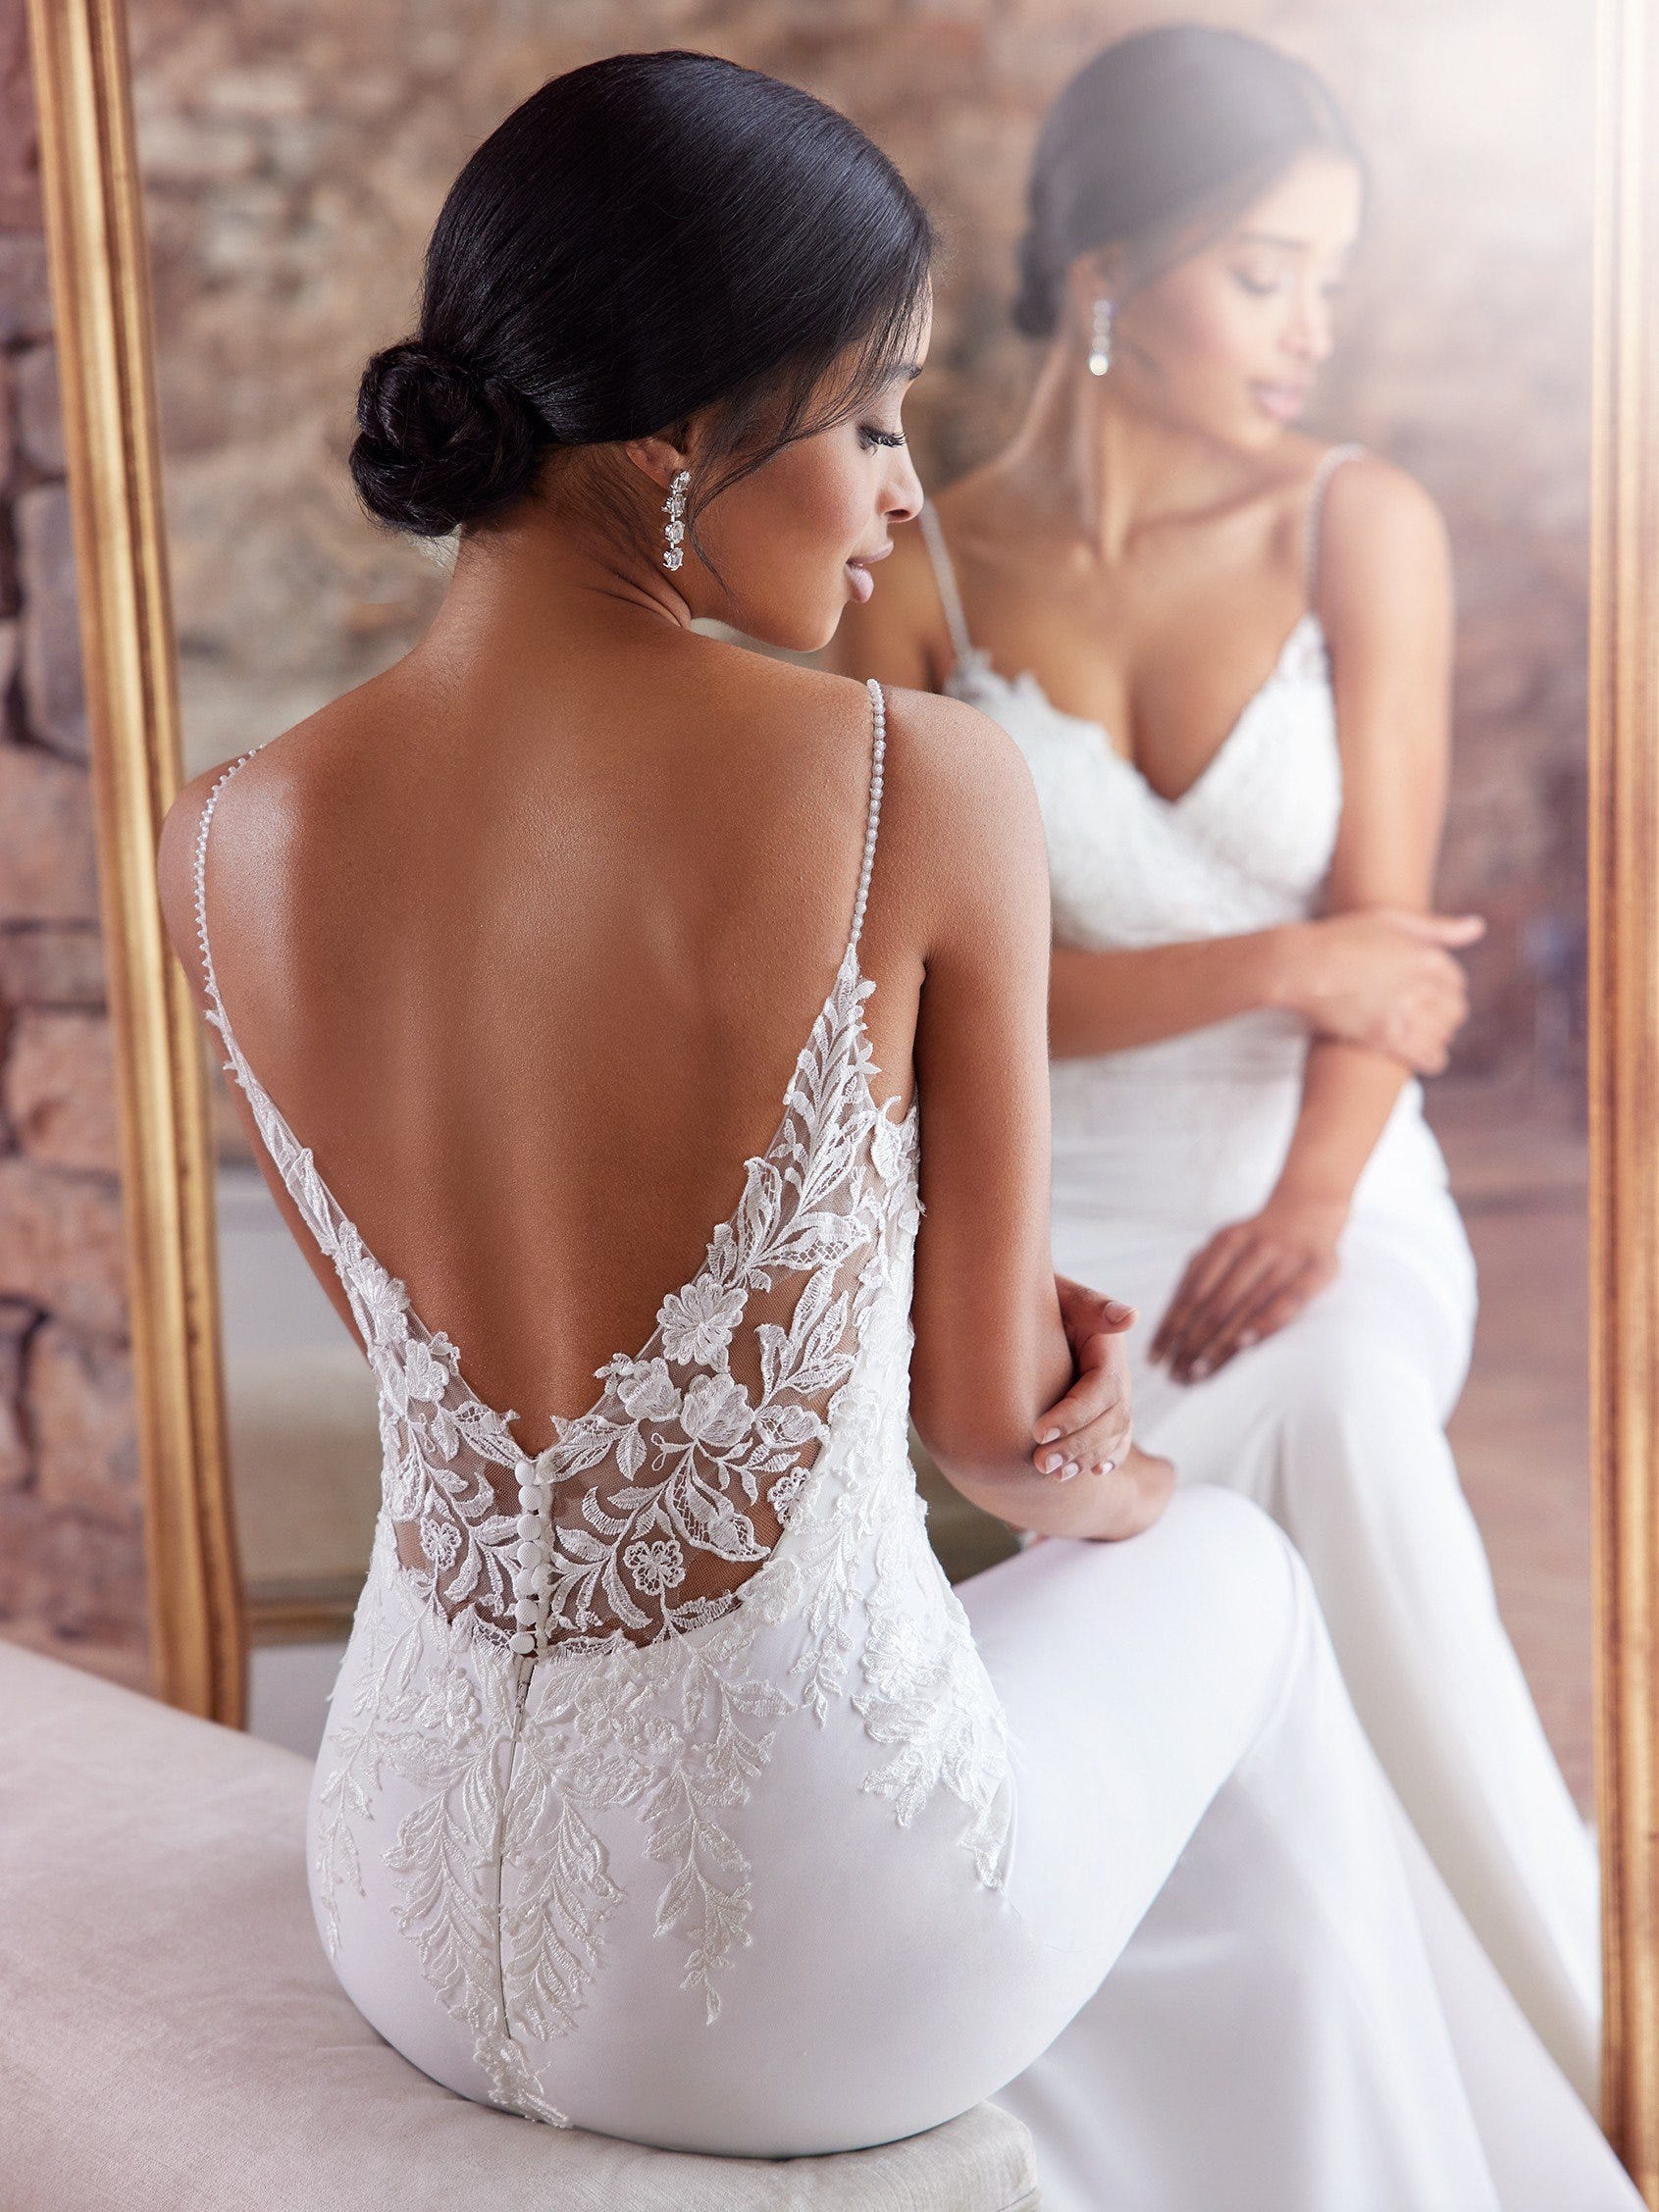 Bridal Gowns Singapore - Online Wedding Dresses for Rent - Love, Fioyo